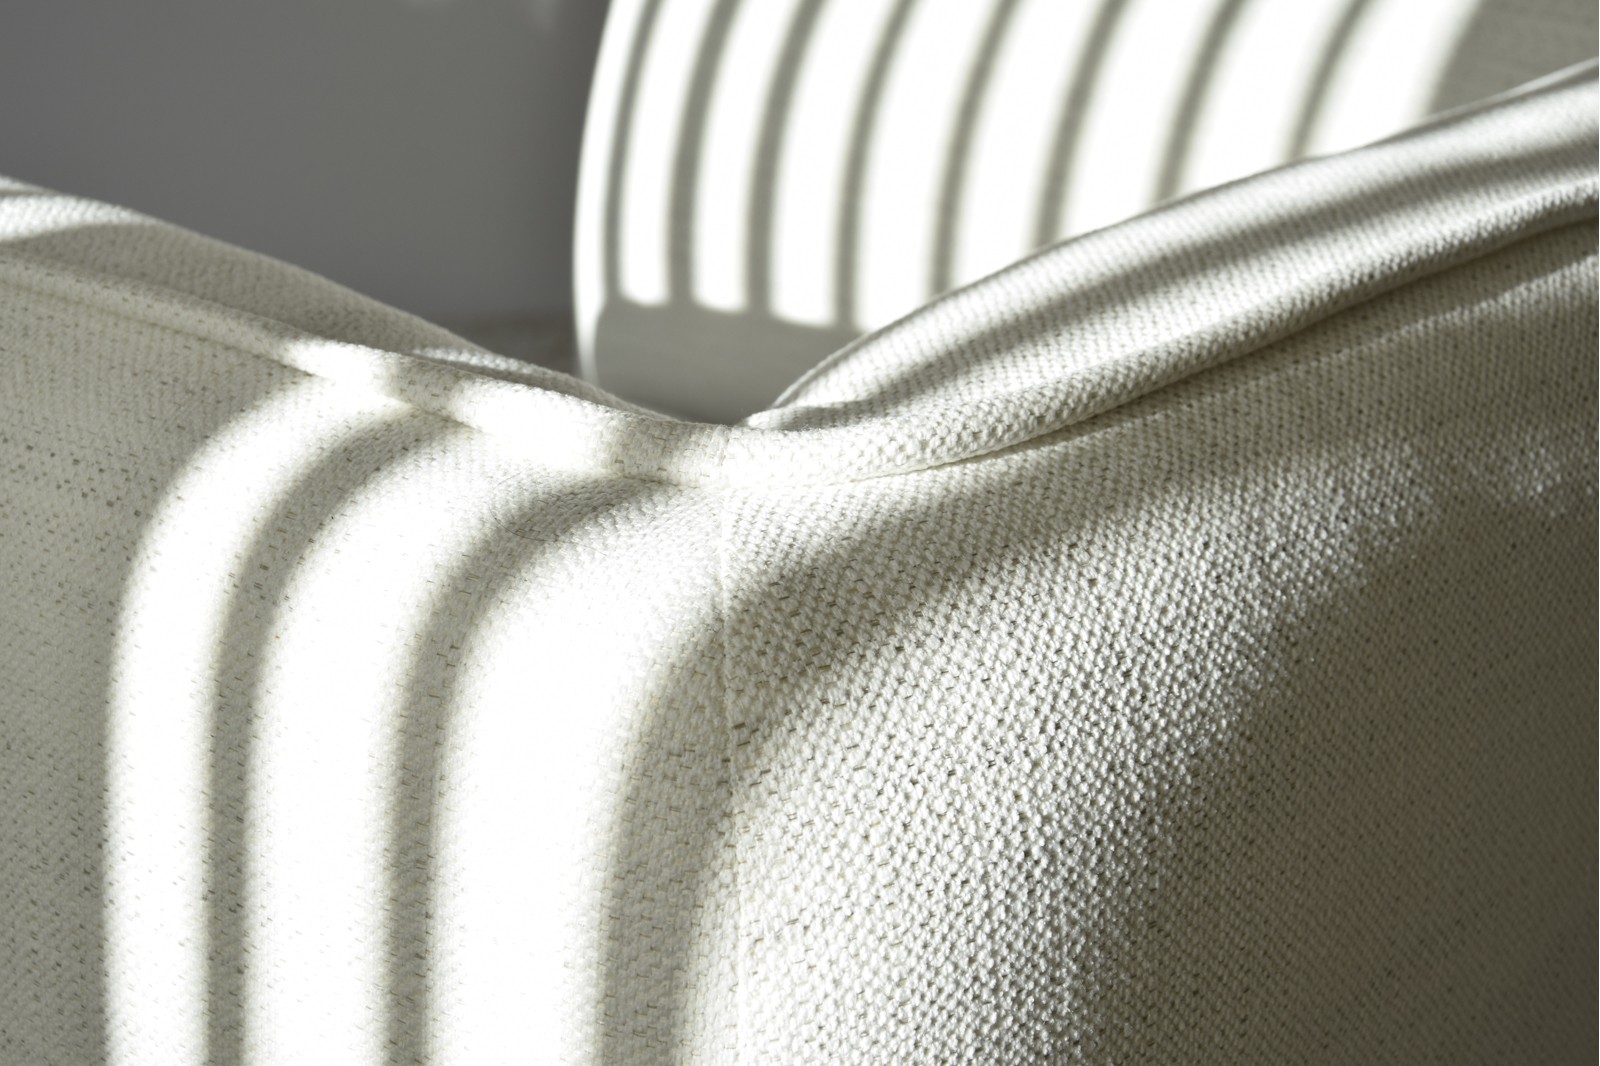 ARMCHAIR "FORMS". UPHOLSTERY IN WHITE TONES